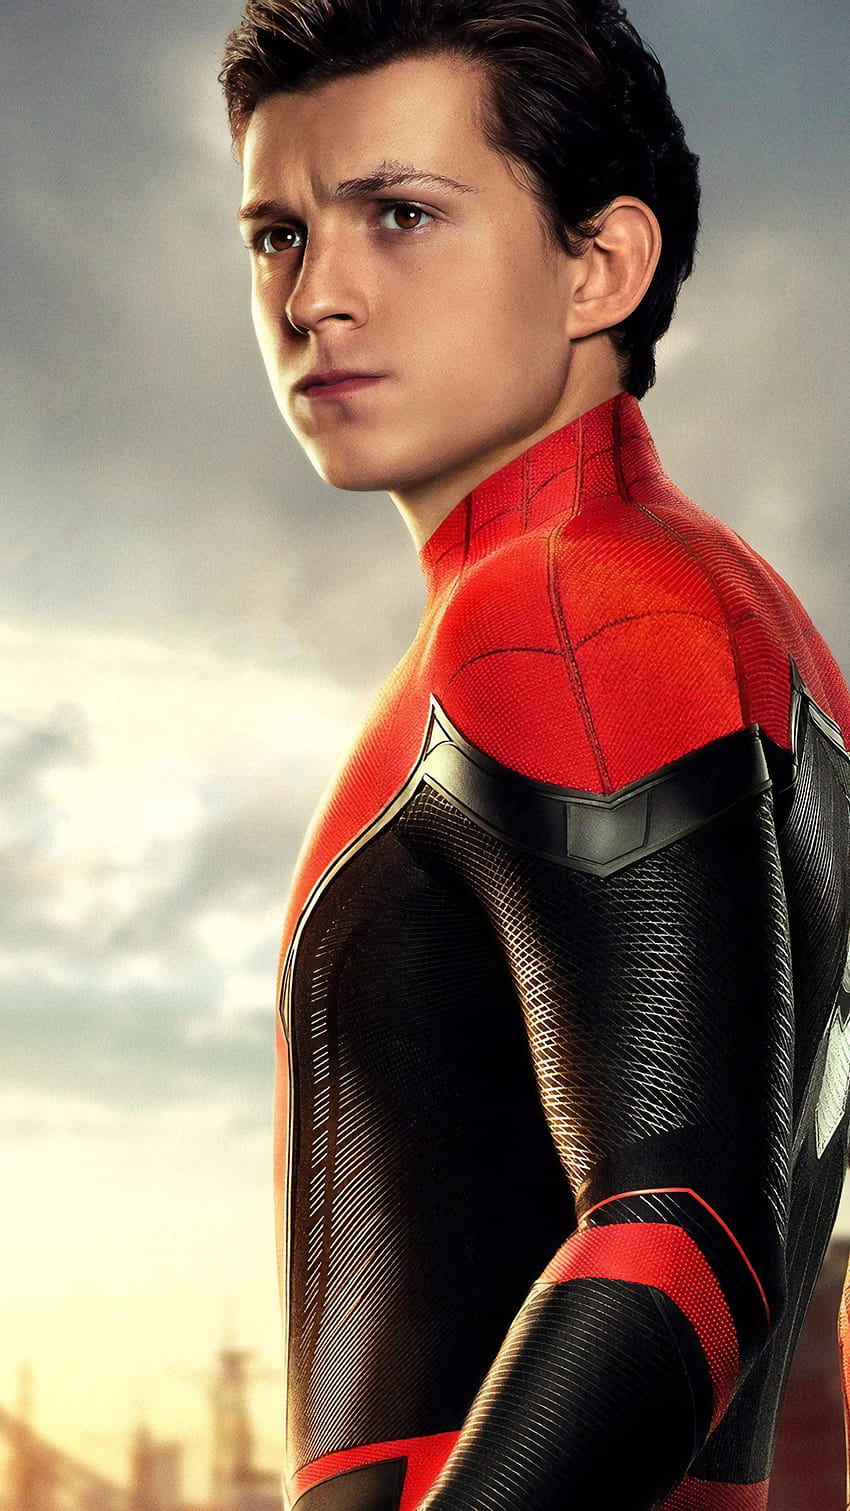 2160x3840 Tom Holland comme Peter Parker Spider Man loin de, peter parker tom holland Fond d'écran de téléphone HD